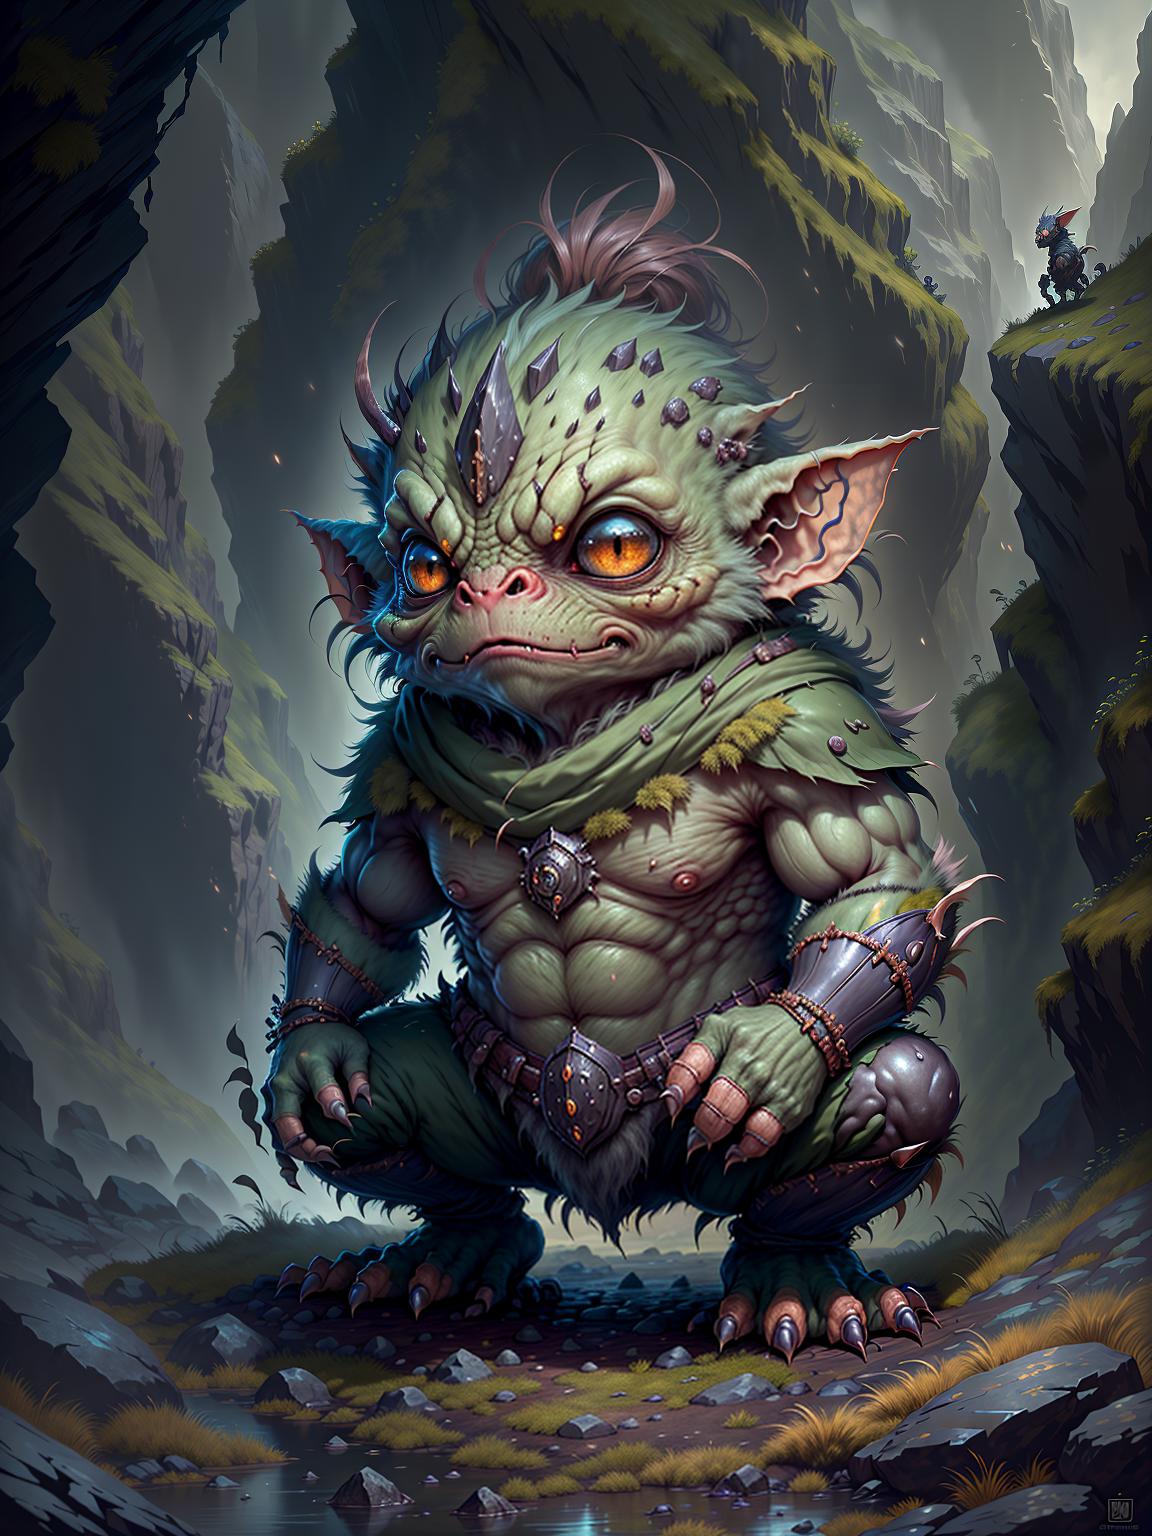  master piece, best quality, ultra detailed, highres, 4k.8k, Fierce goblin warrior, Guarding its territory with a menacing posture, Menacing and aggressive, BREAK Encounter with a ferocious goblin in the mountains., Remote mountain pass, Rugged terrain, dense foliage, and ominous mist, BREAK Foreboding and perilous, Subtle glow from the goblin's menacing eyes, emphasizing its ferocity, creature00d,Cu73Cre4ture